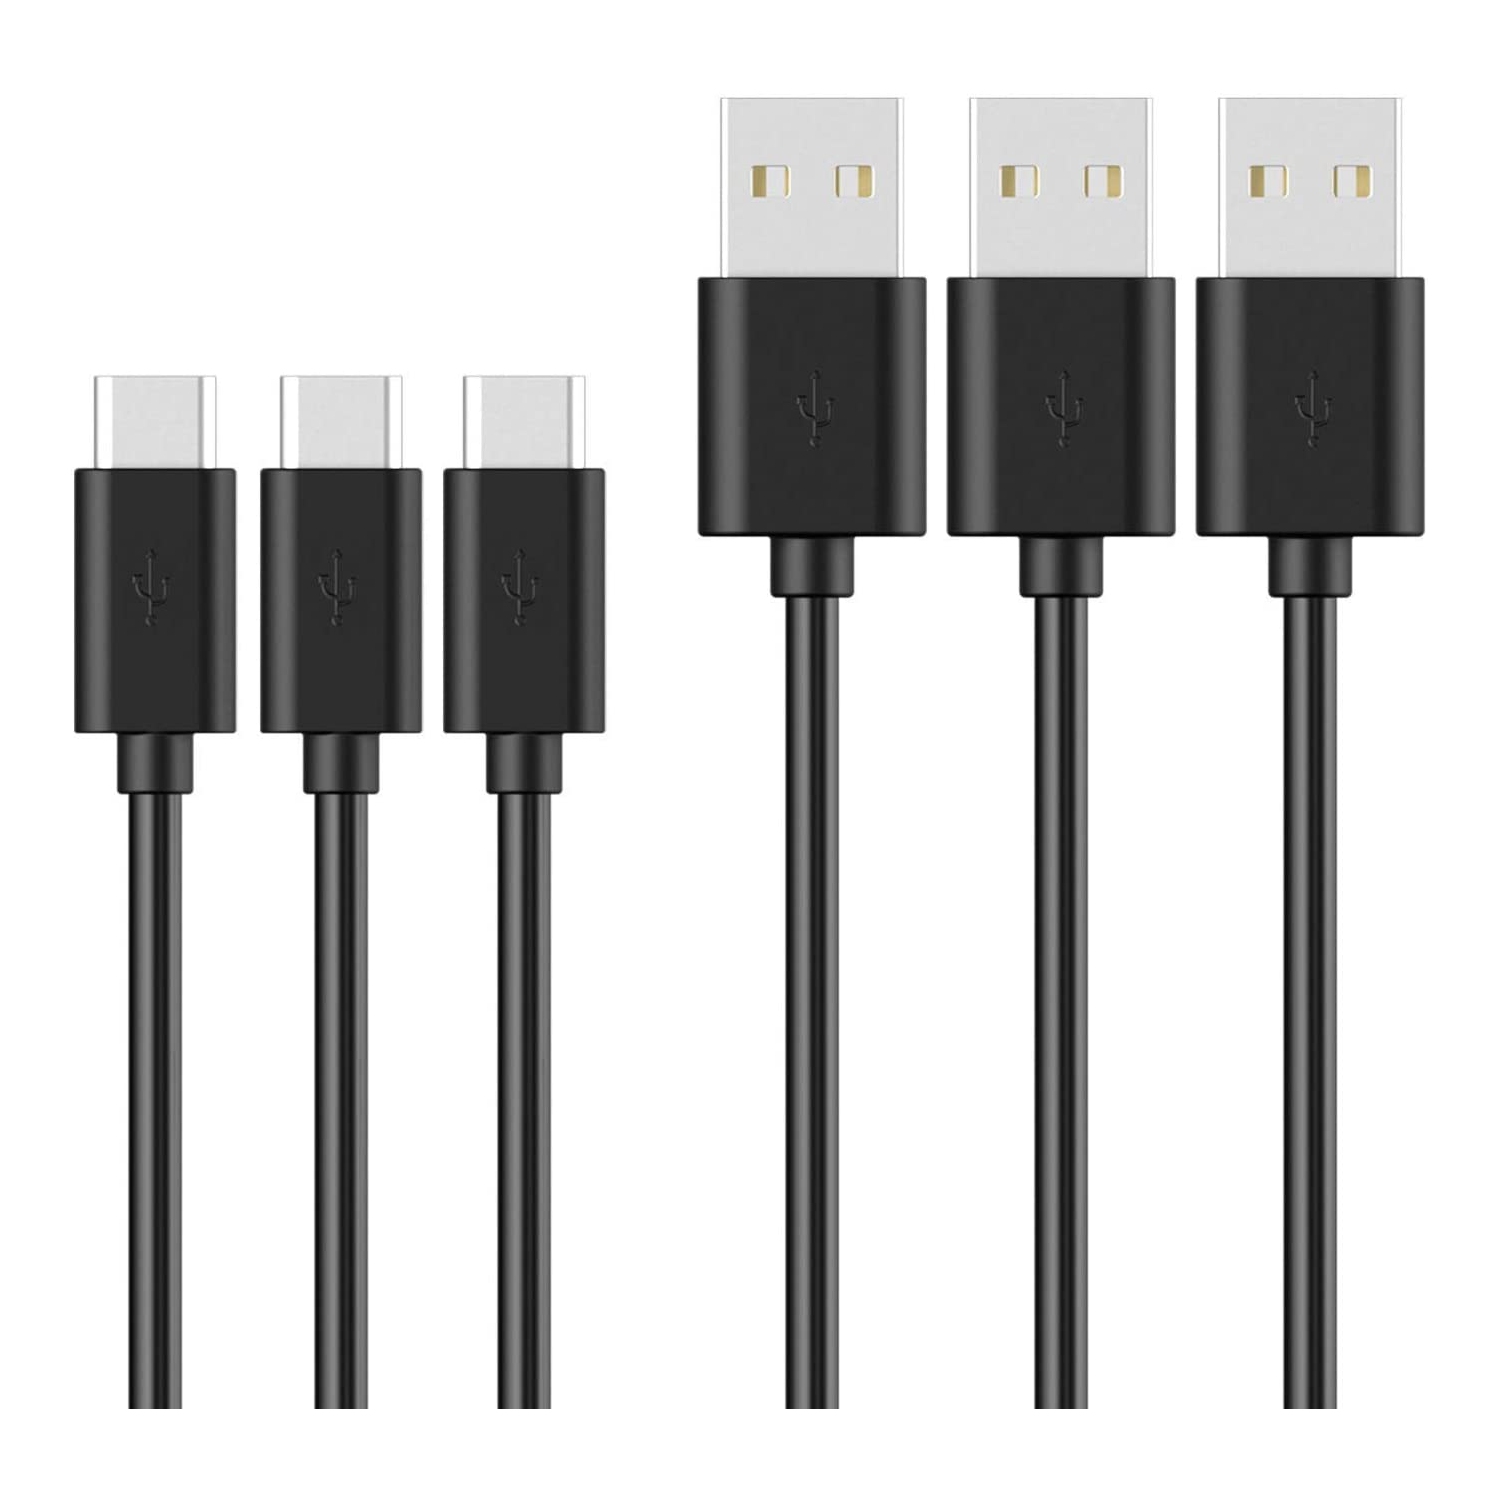 USB C Charger Cable [3ft USB Type C Cable 3 Pack] | Compatible with Samsung S9 S8 A8 A5, LG G7 G6 G5 V30, Huawei P20 P10